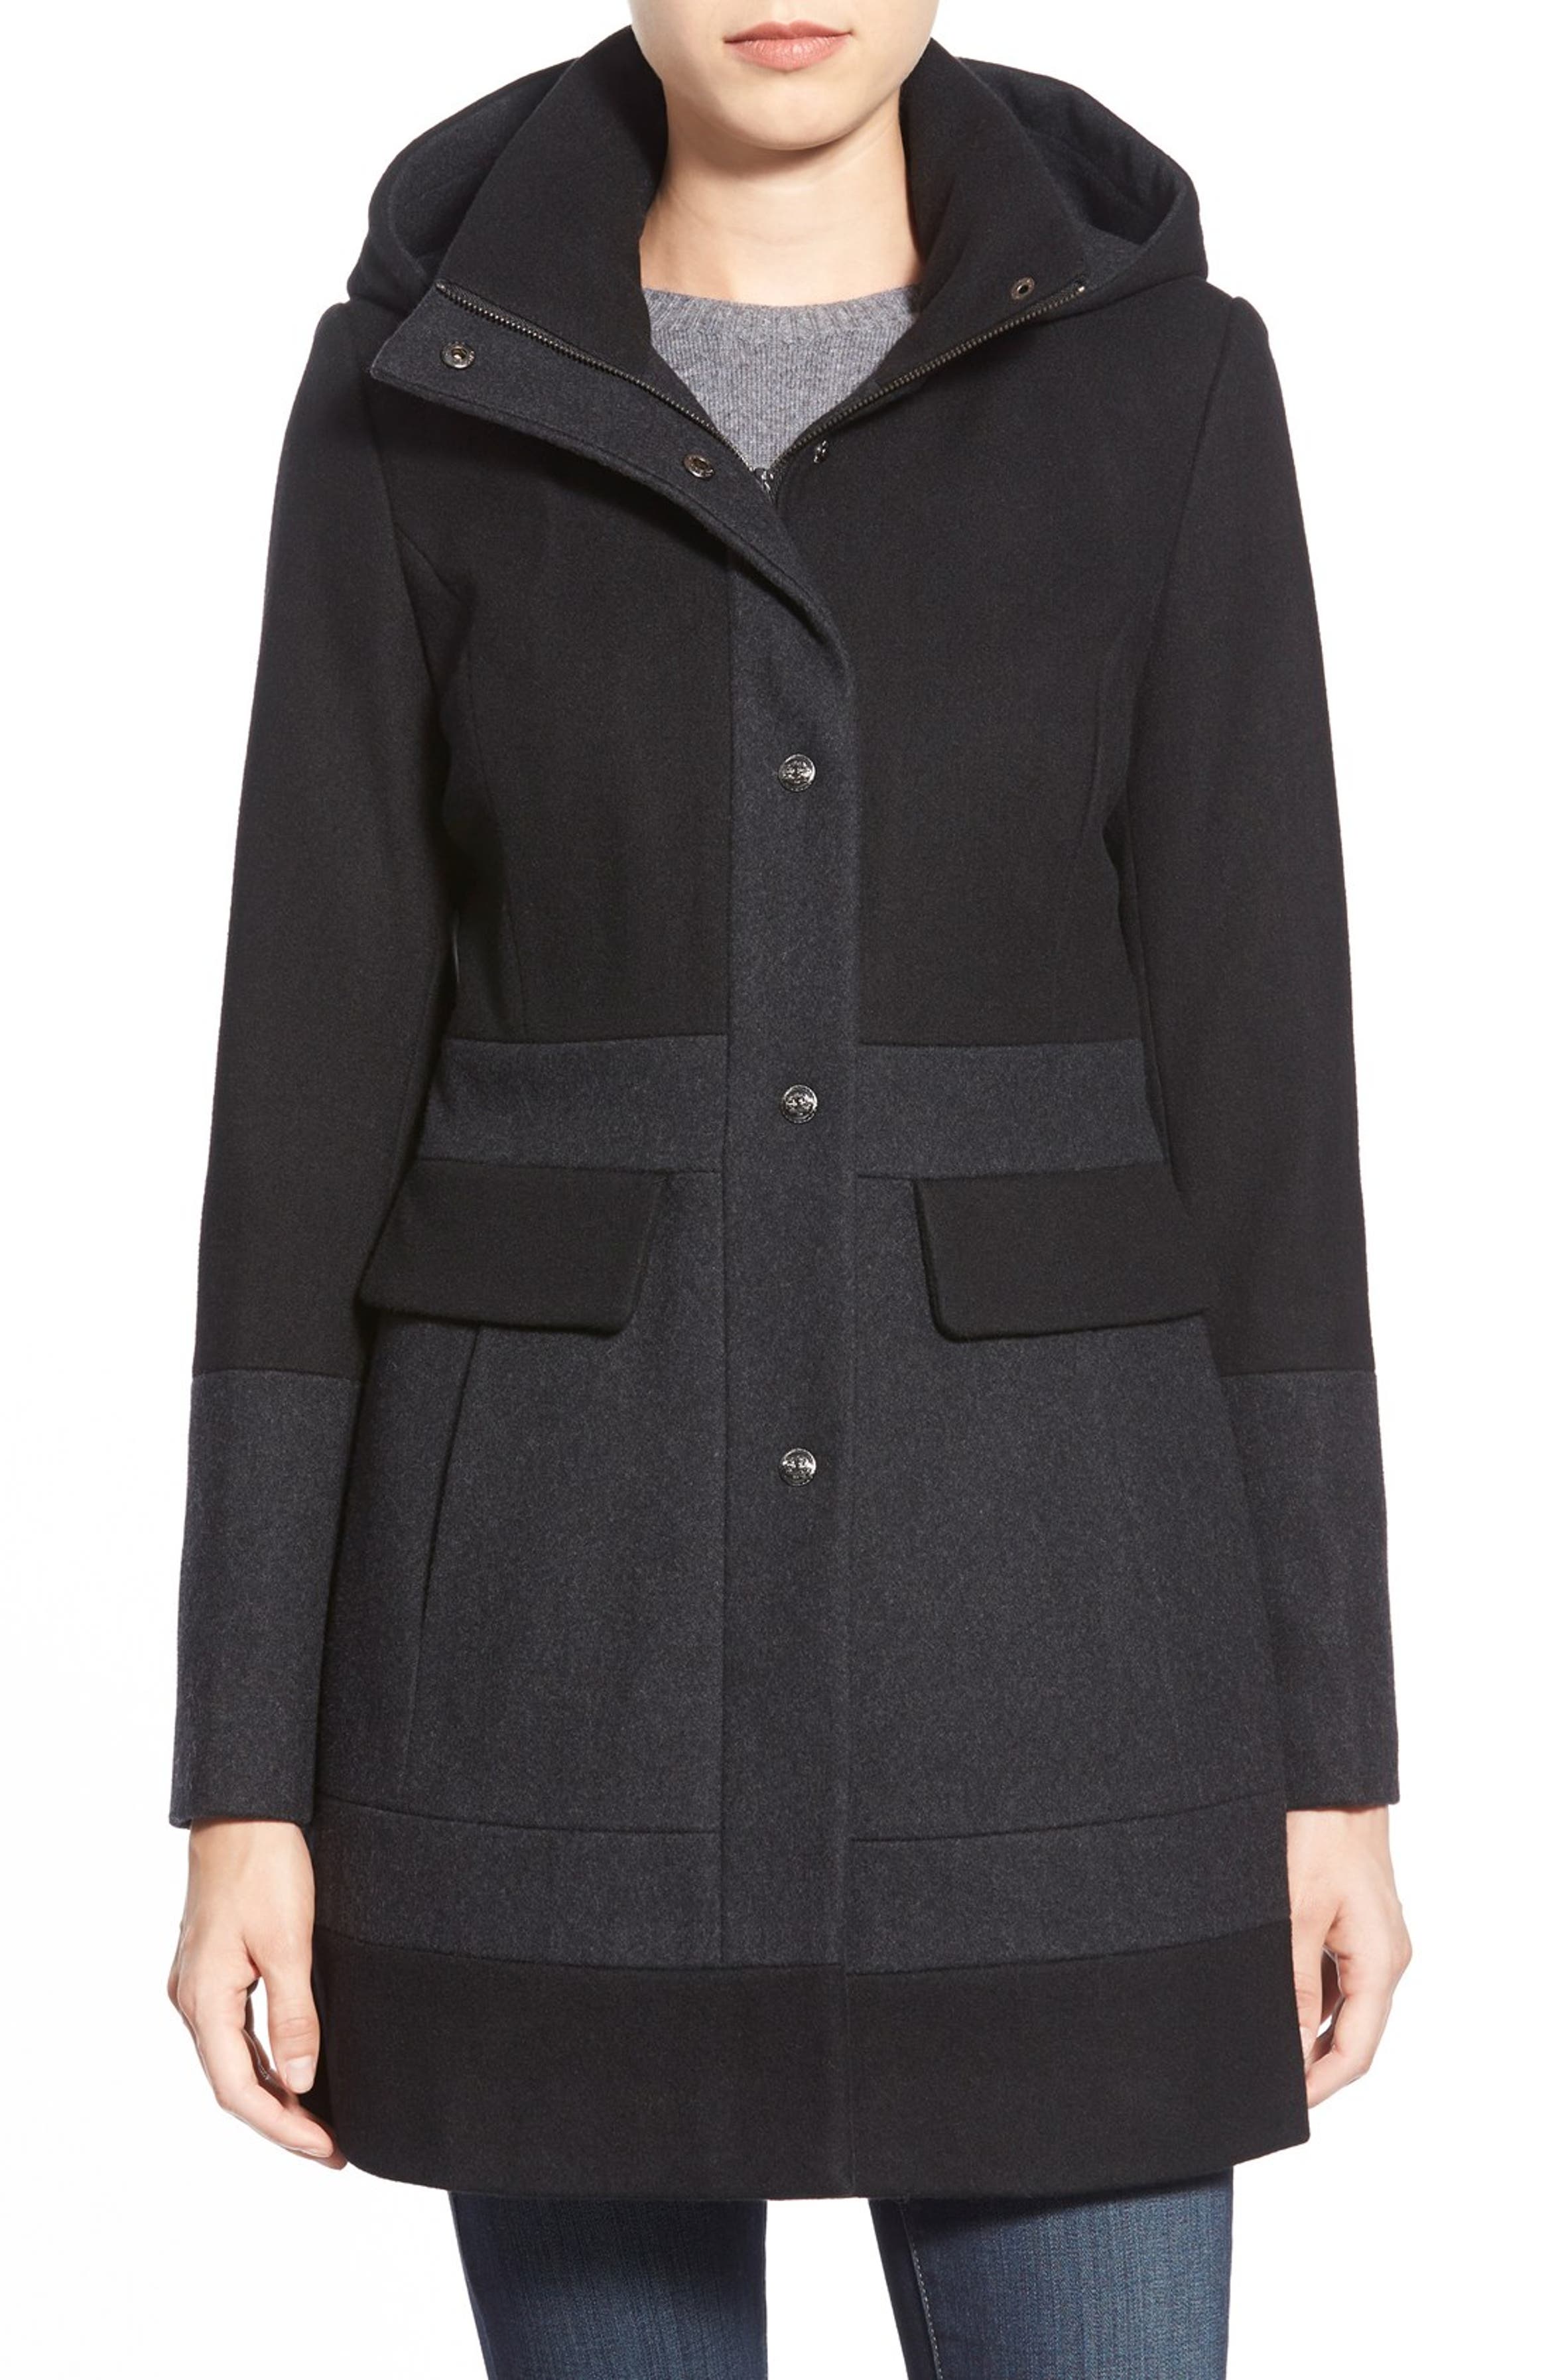 GUESS Colorblock Hooded Wool Blend Coat | Nordstrom